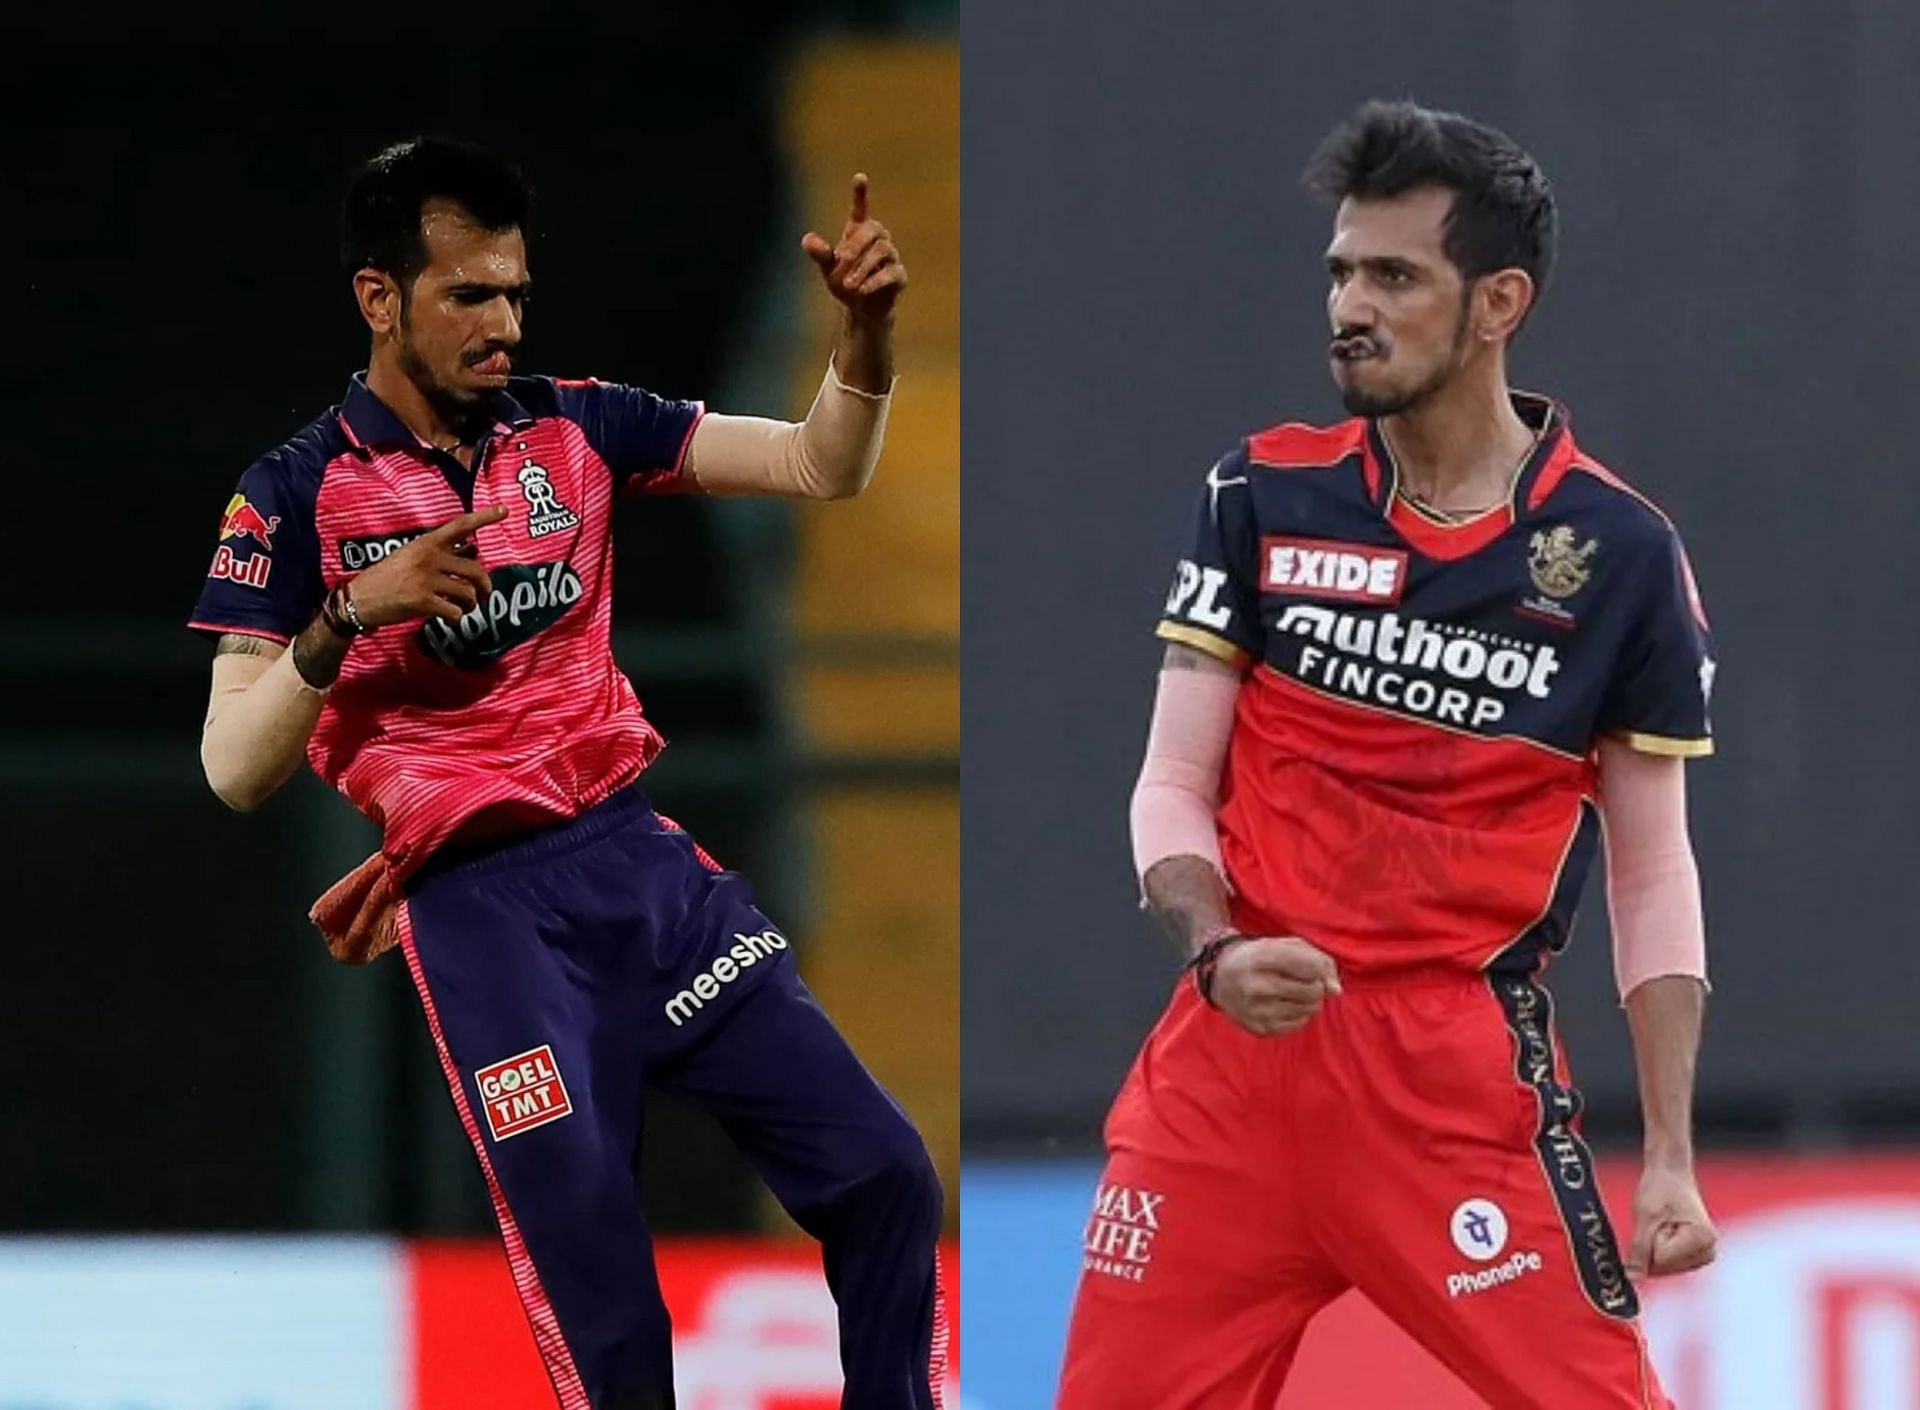 Yuzvendra Chahal enjoyed success at both RR and RCB over the years. (PC: IPLT20.com)